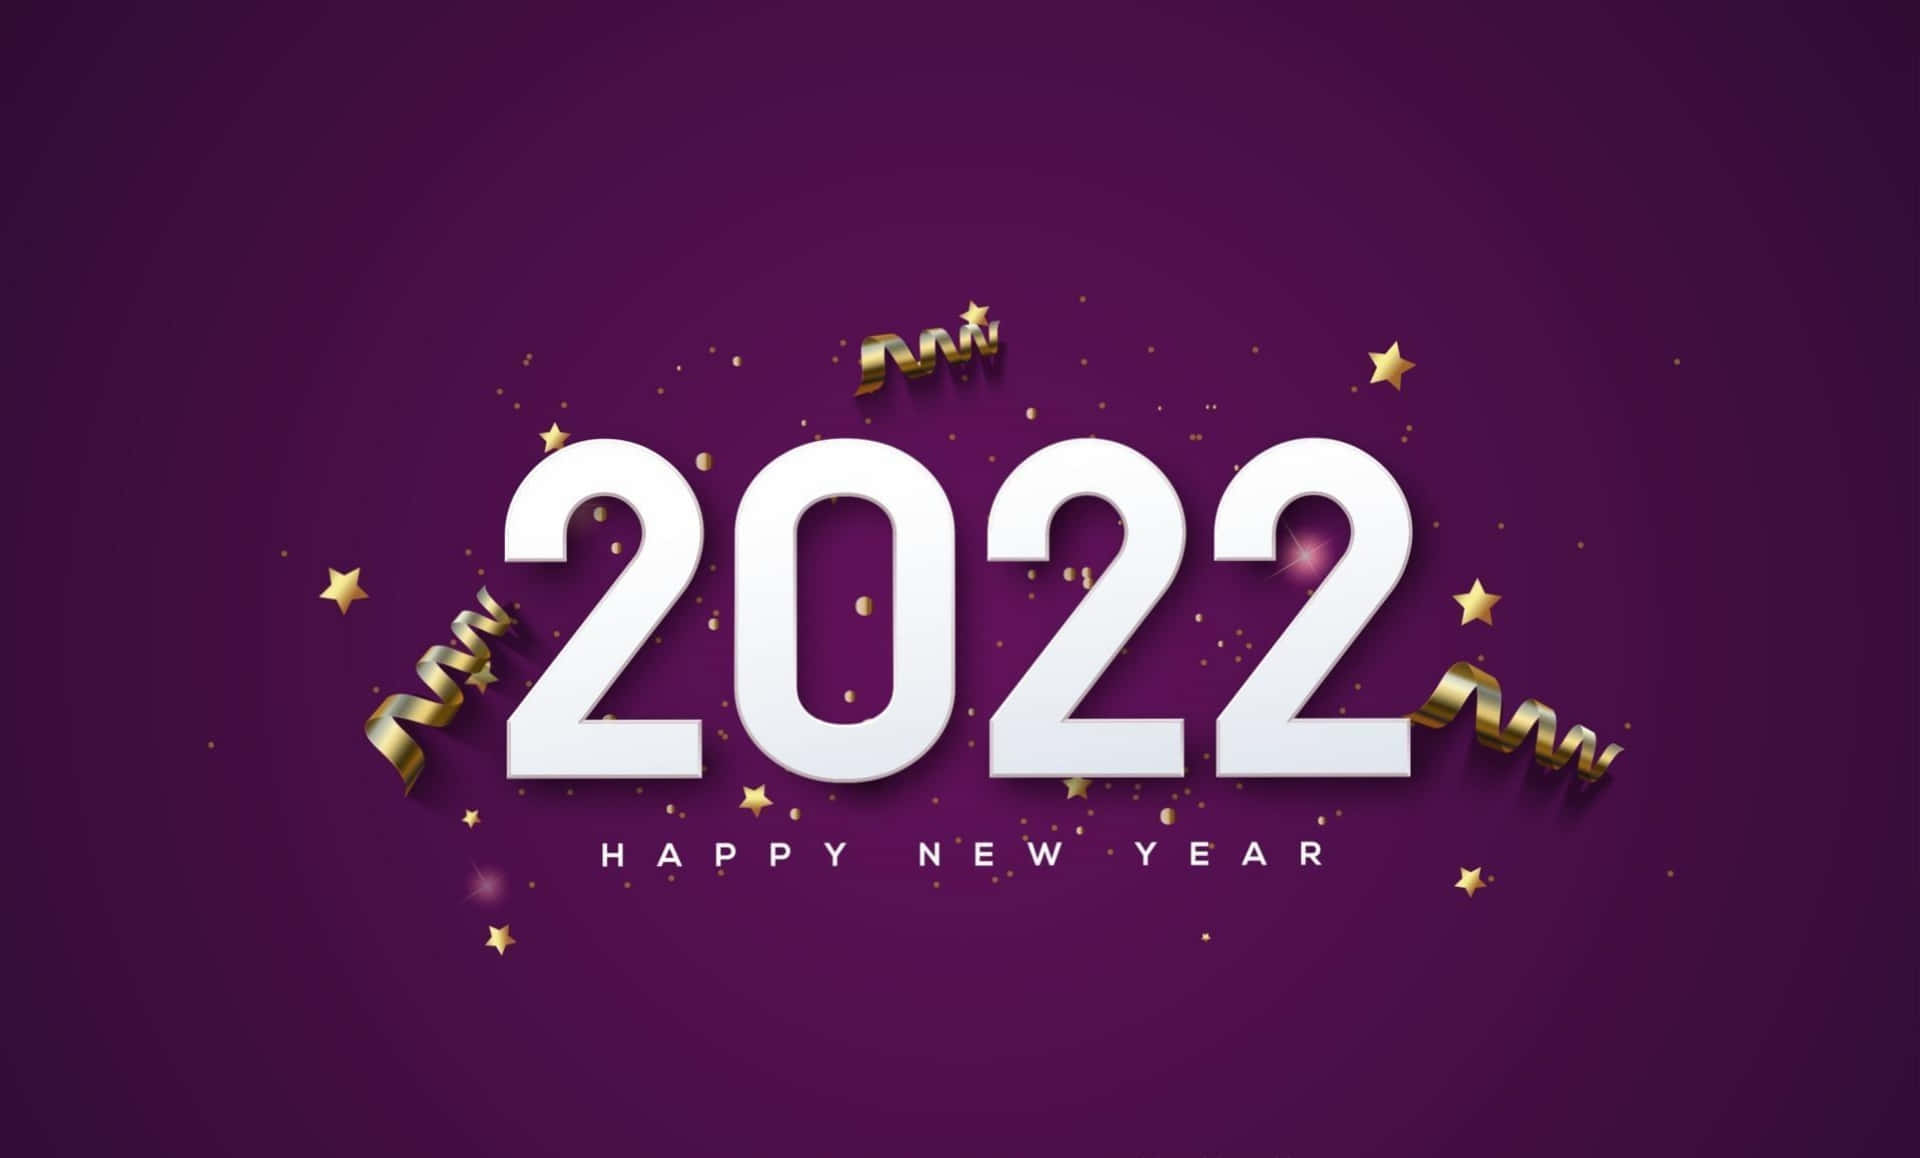 Wishing You a Happy and Joy-filled New Year 2022!